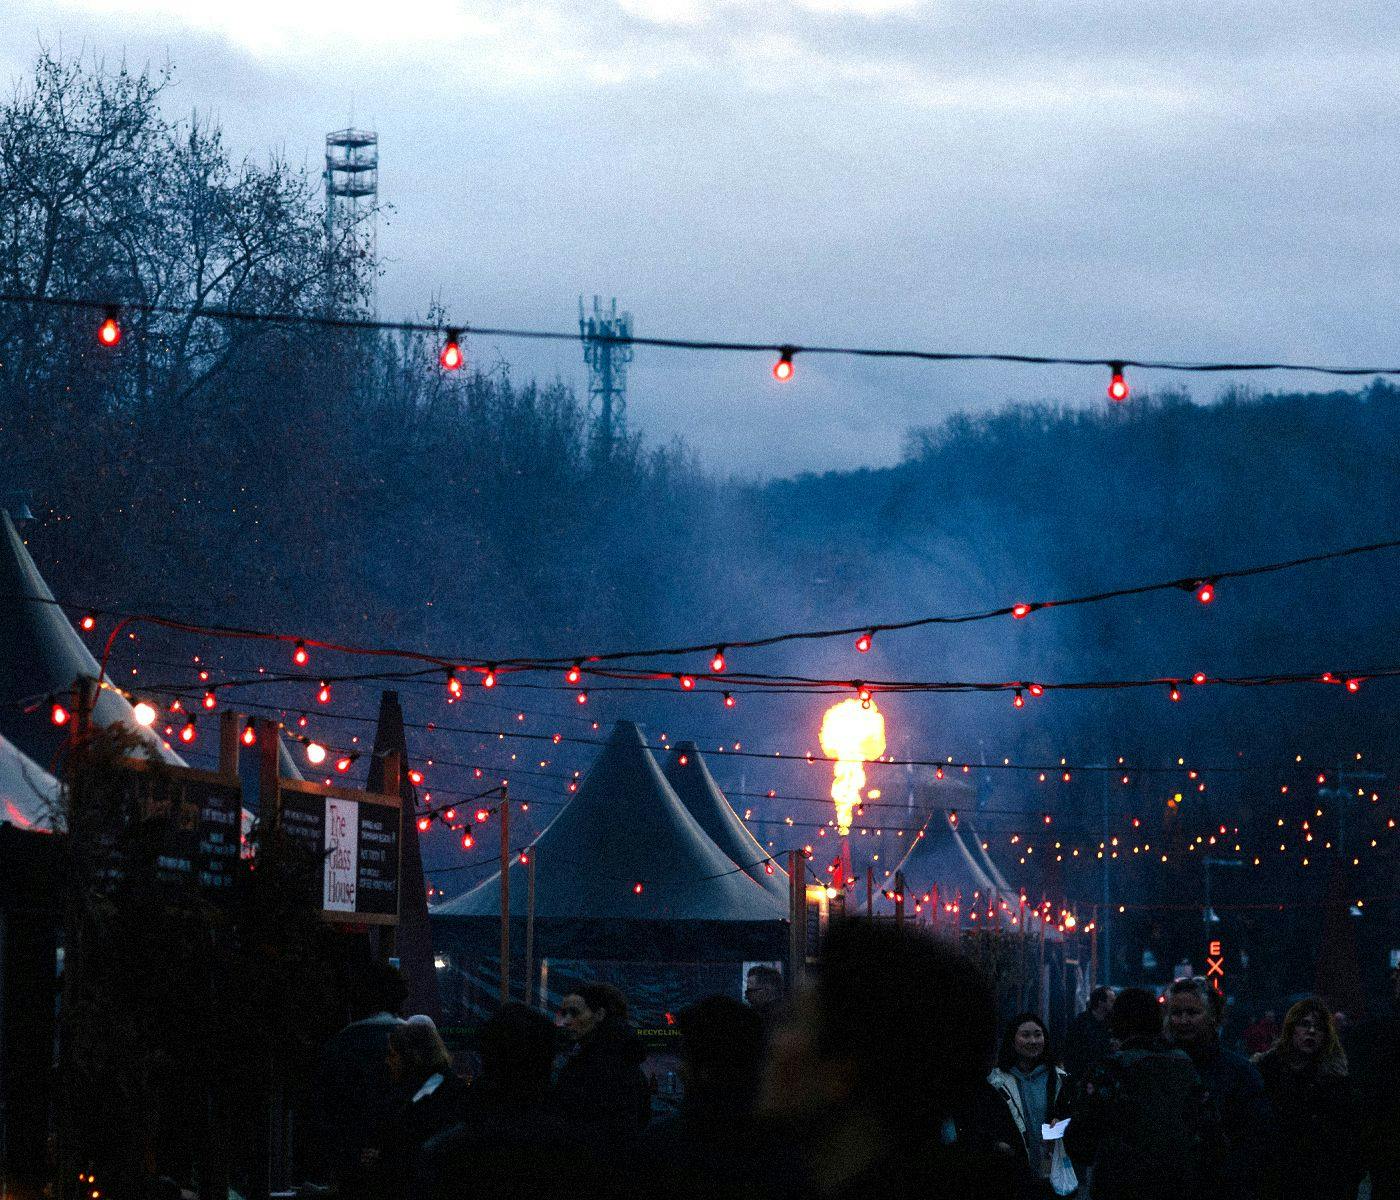 Outside at Winter Feast, strings of lights, people and stall gazebos stretch into the distance.